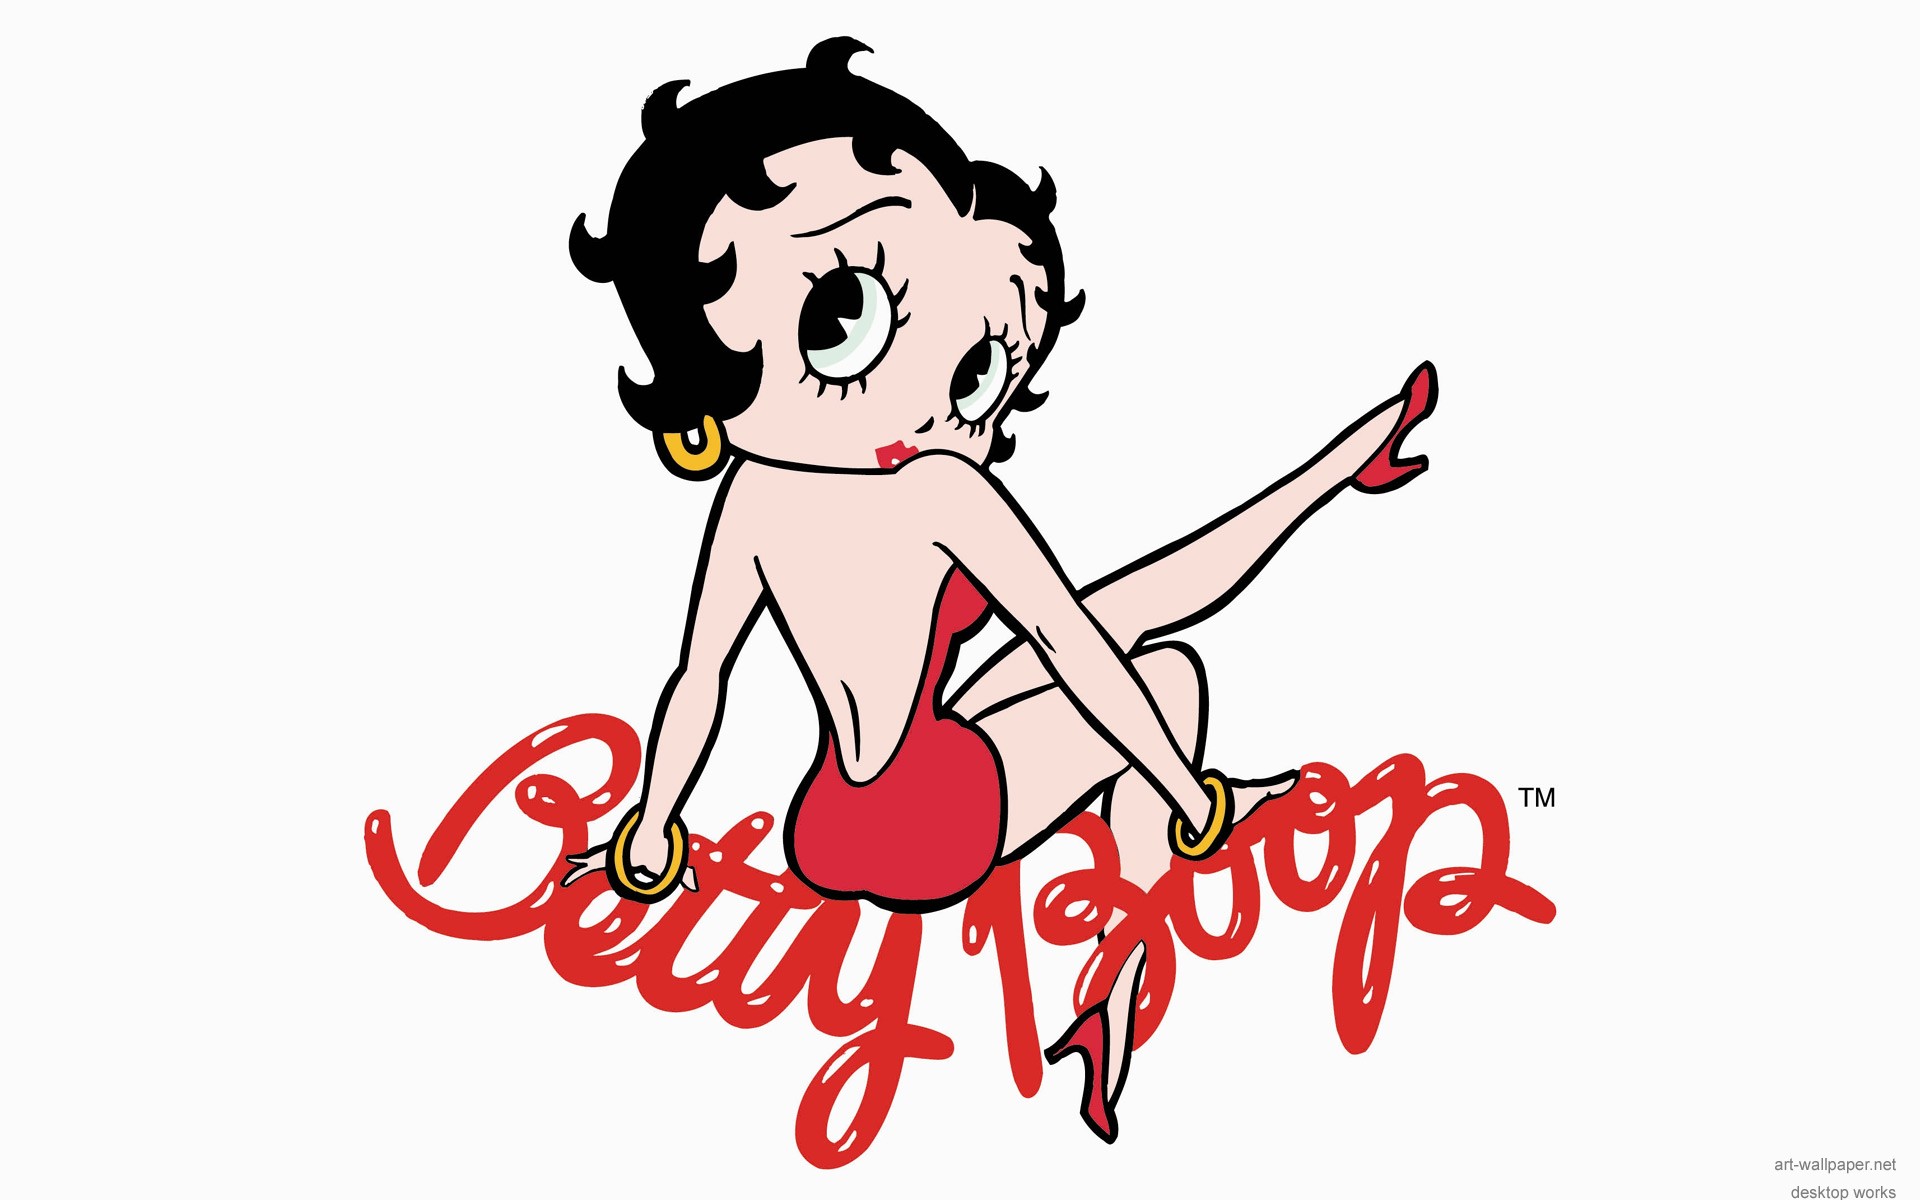 Free Download Alpha Coders Wallpaper Abyss Comics Betty Boop 19x10 For Your Desktop Mobile Tablet Explore 73 Wallpapers Betty Boop Betty Boop Wallpapers Free Download Betty Boop Valentine Wallpaper